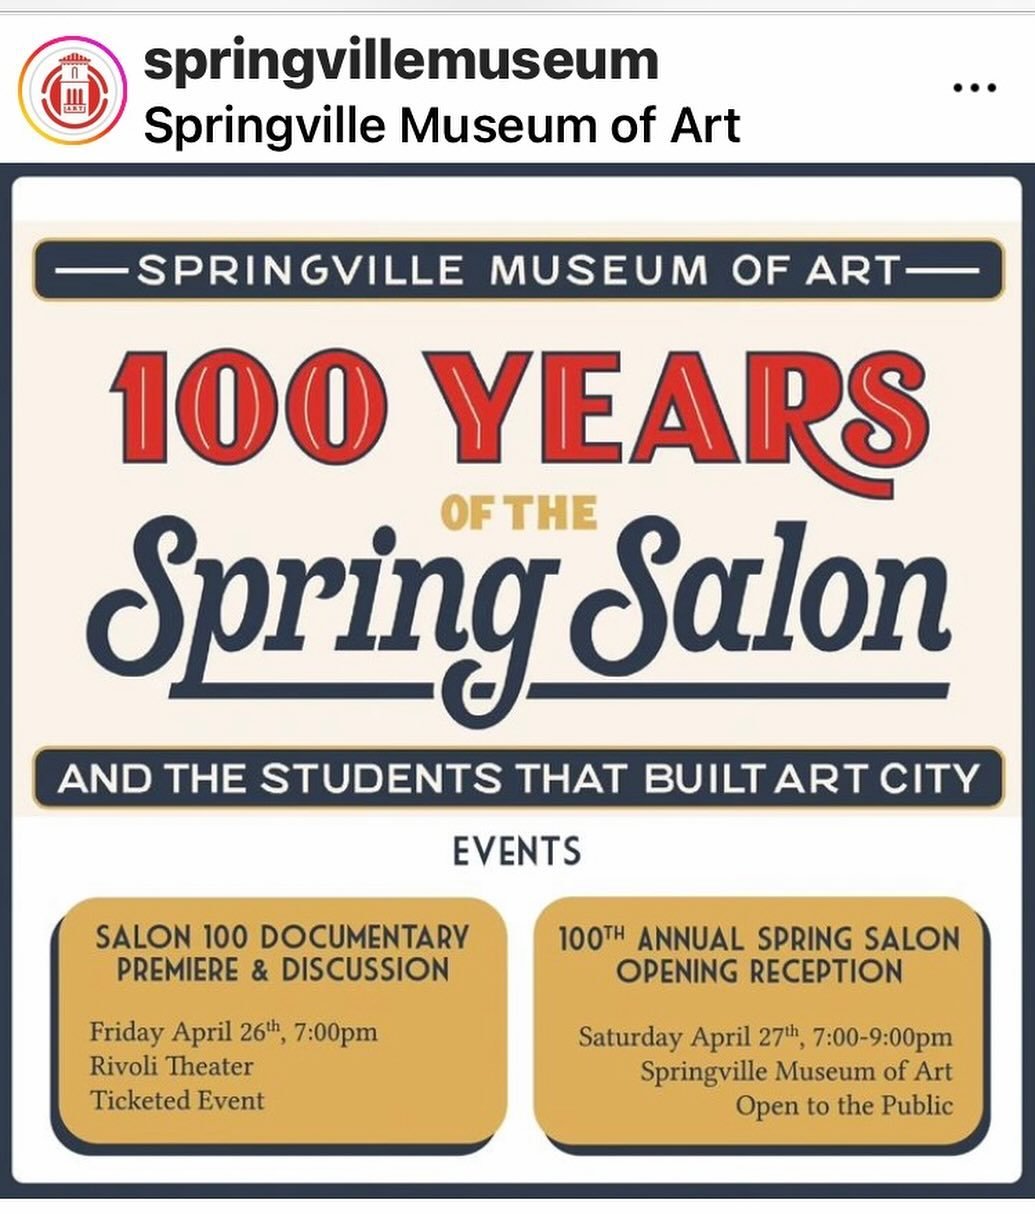 My &ldquo;TRADITIONS&rdquo; piece will be featured in the &ldquo;Salon 100:  A Retrospective of 100 Spring Salons&rdquo;. This exhibition opens tonight, April 27th 7-9pm @sprinvillemuseum .  This is a huge honor.  THANK YOU from the bottom of my hear